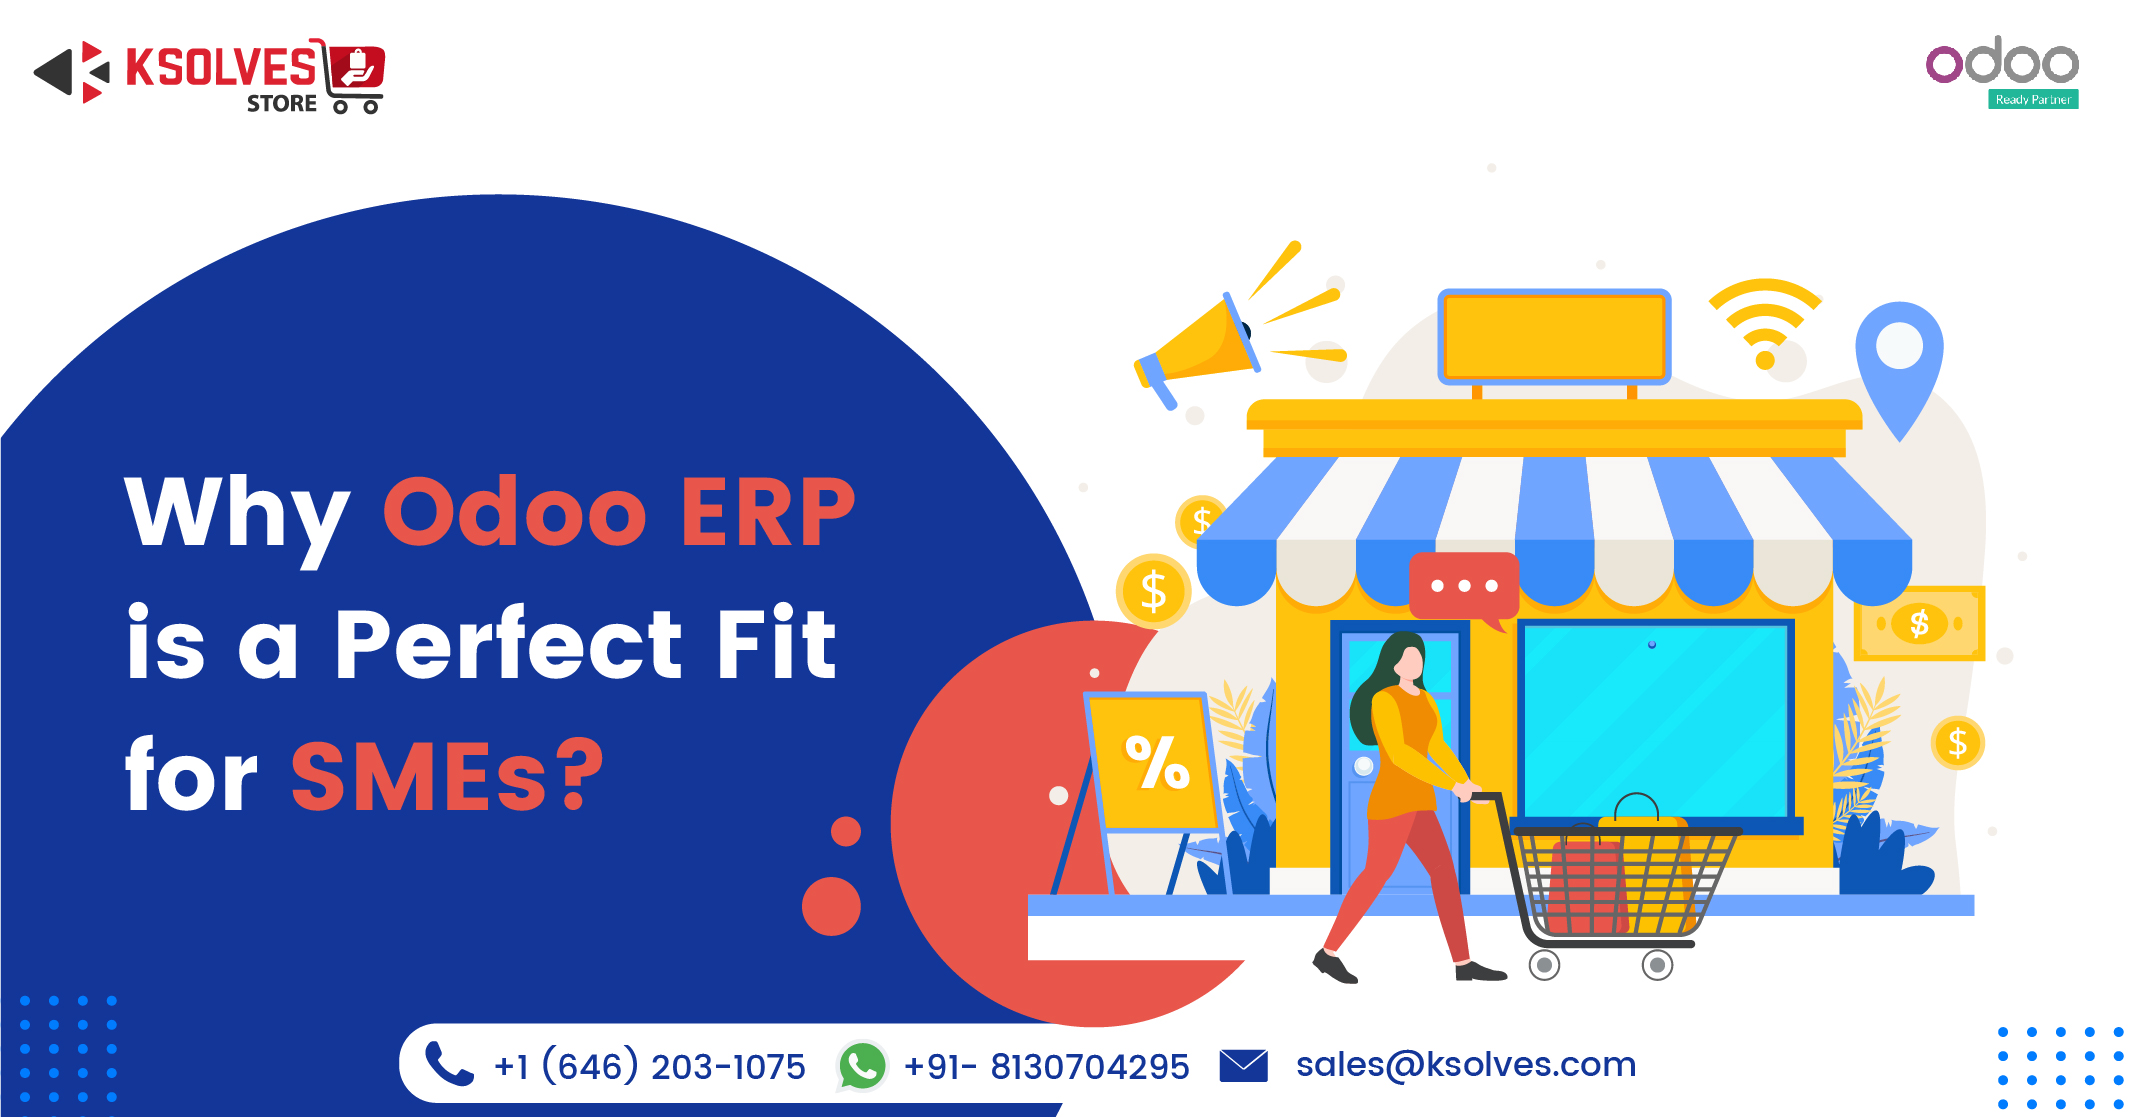 Why Odoo ERP is a perfect Fit for SMEs